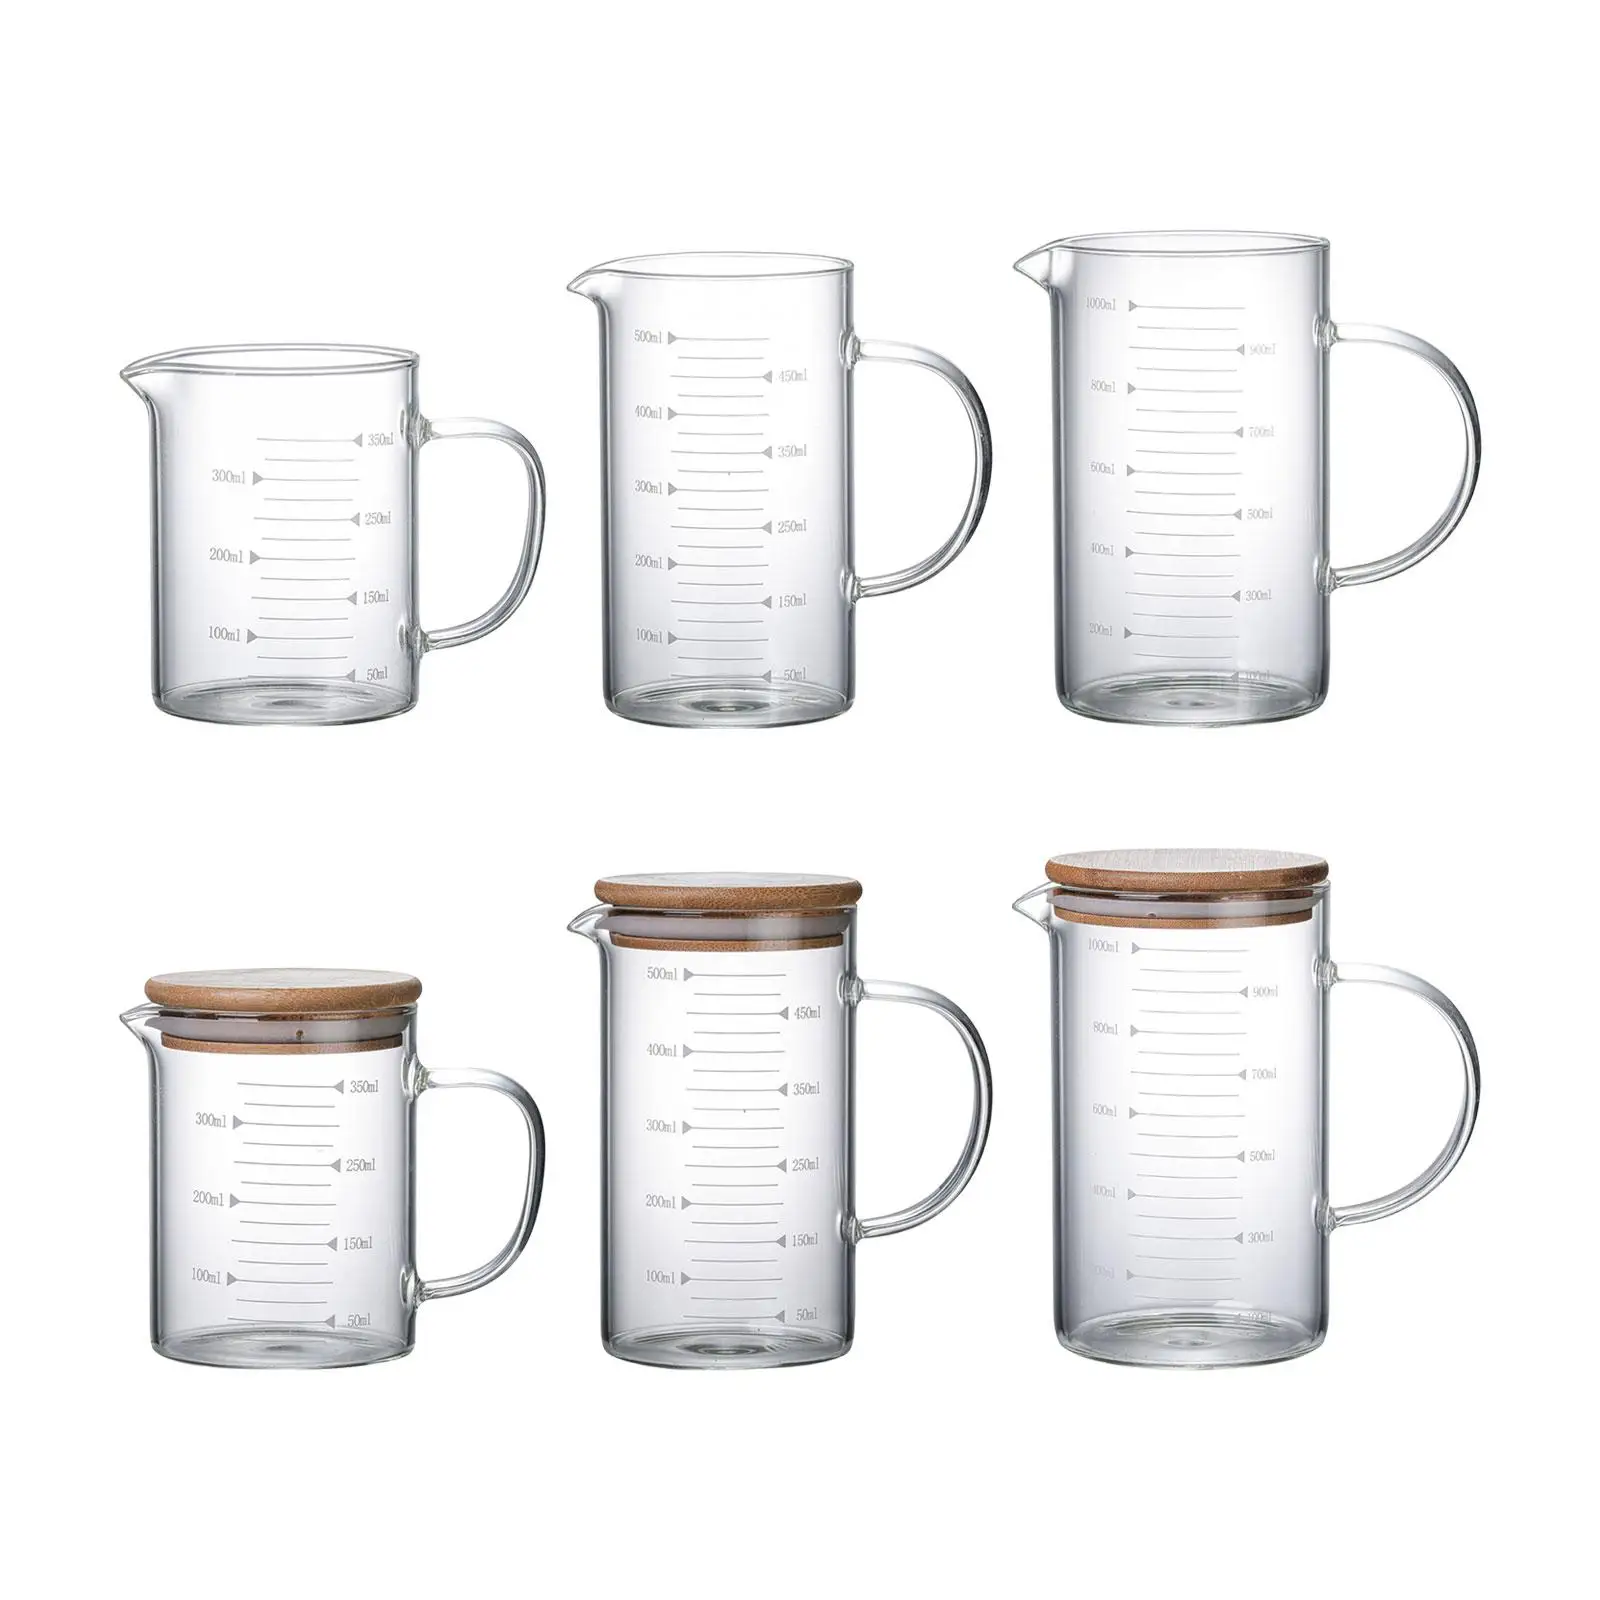 Measuring Cup Containers with Scale Milk Glass Cup for Tea Milk Beverage